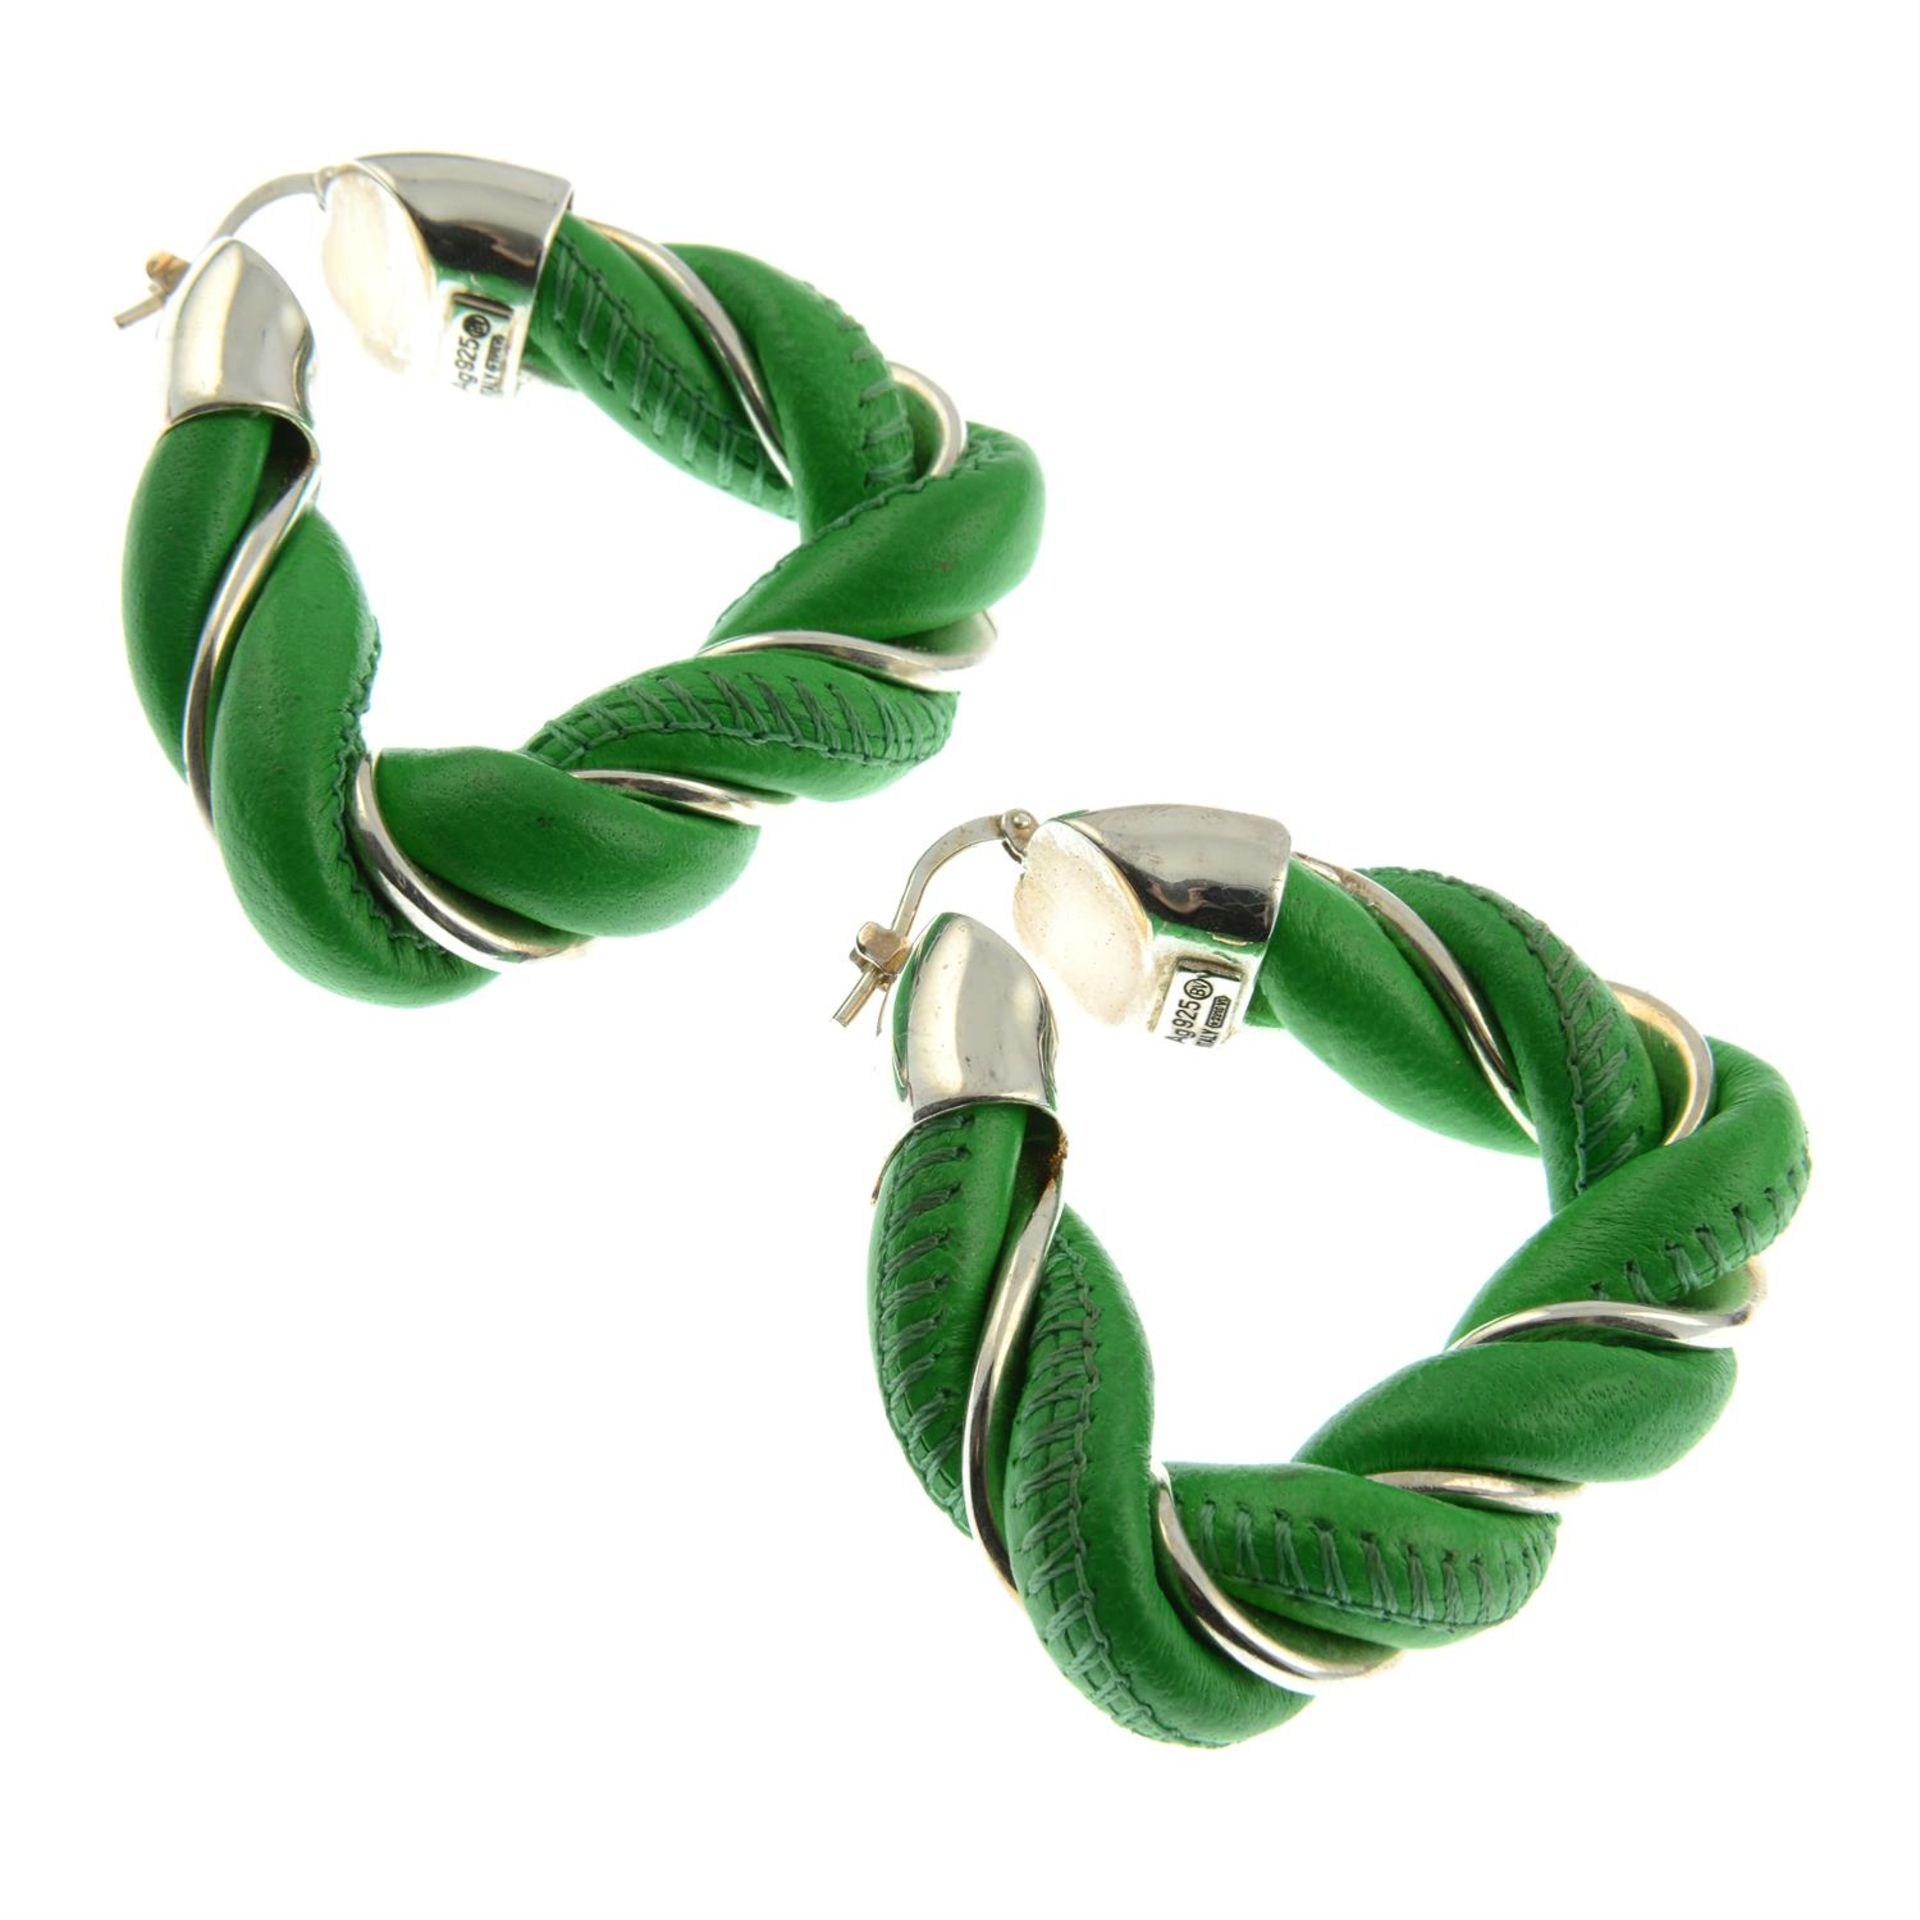 BOTTEGA VENETA - a pair of silver and green leather twisted hoop earrings. - Image 2 of 3